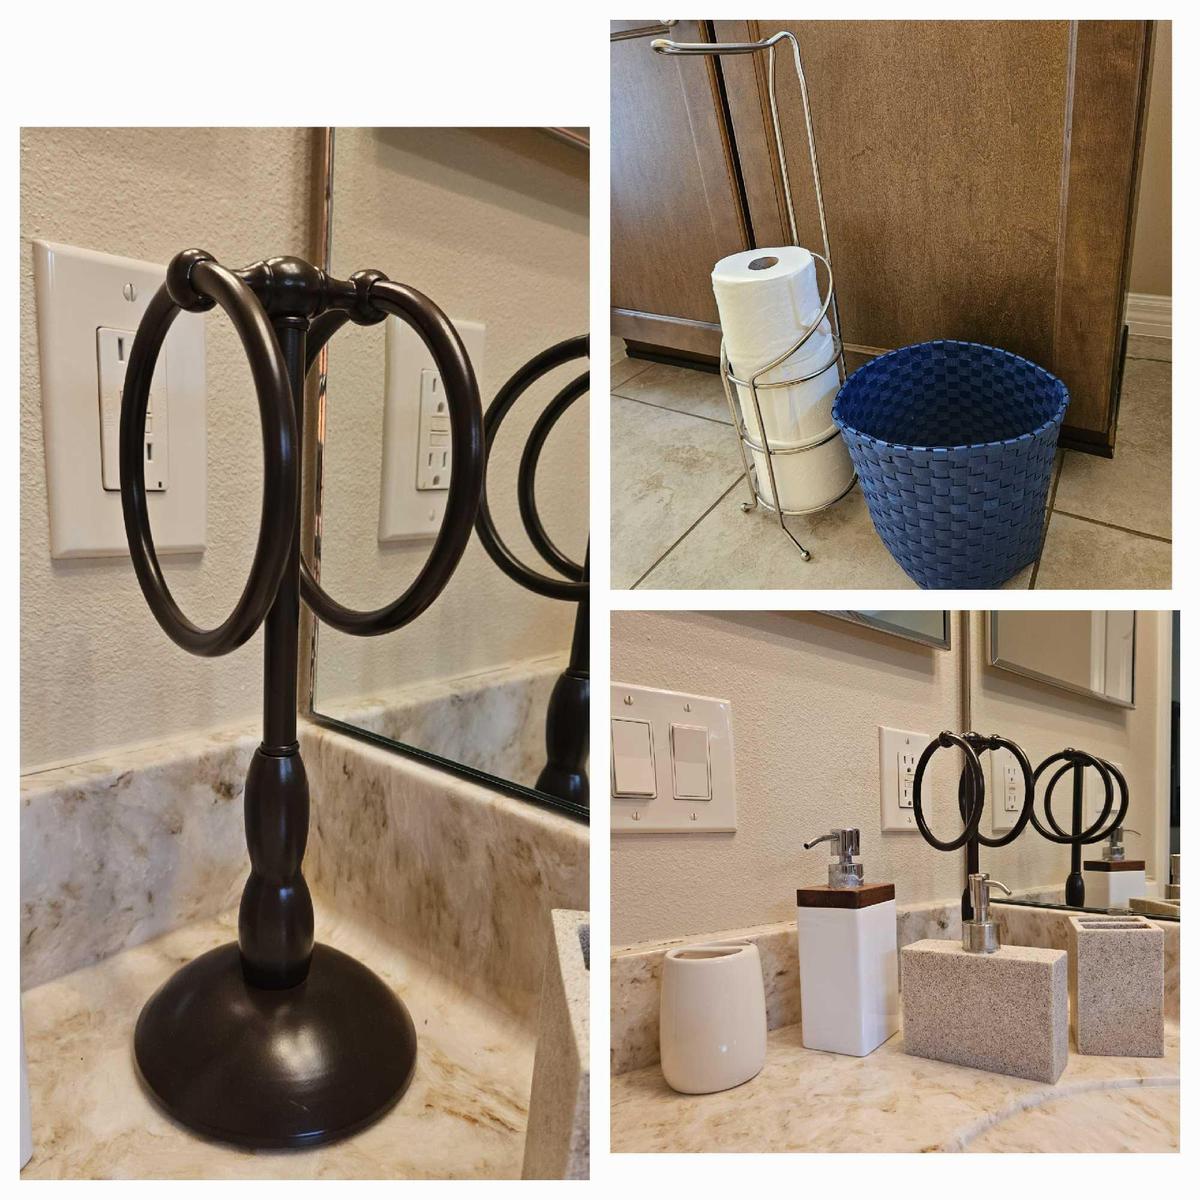 Bathroom grouping - soap dispensers, holders for toothbrush and toilet paper